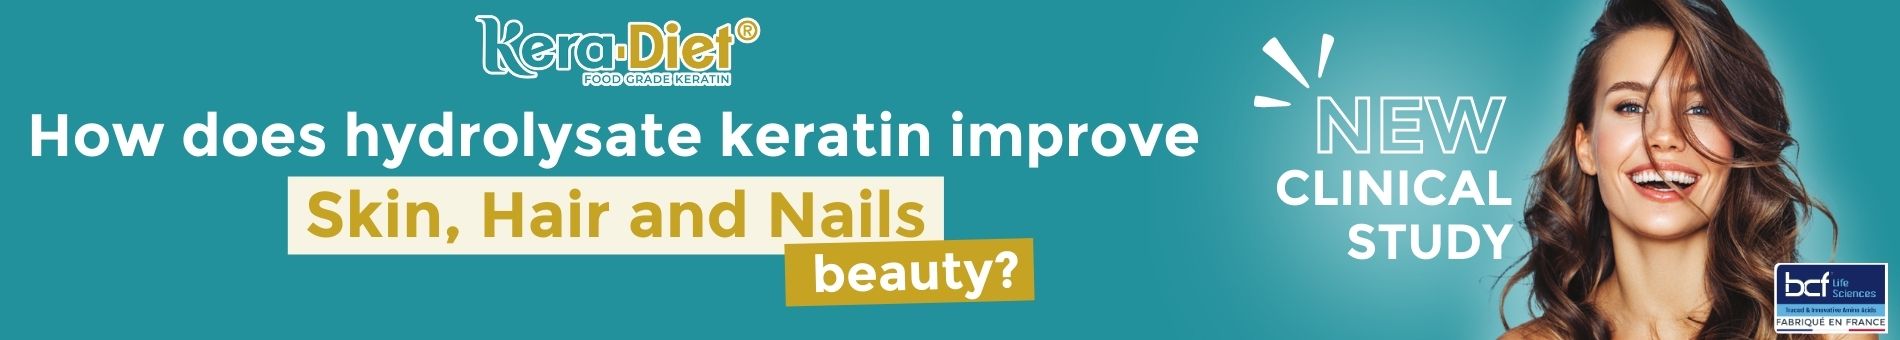 How does hydrolysate keratin improve Skin, hair, and nails beauty?